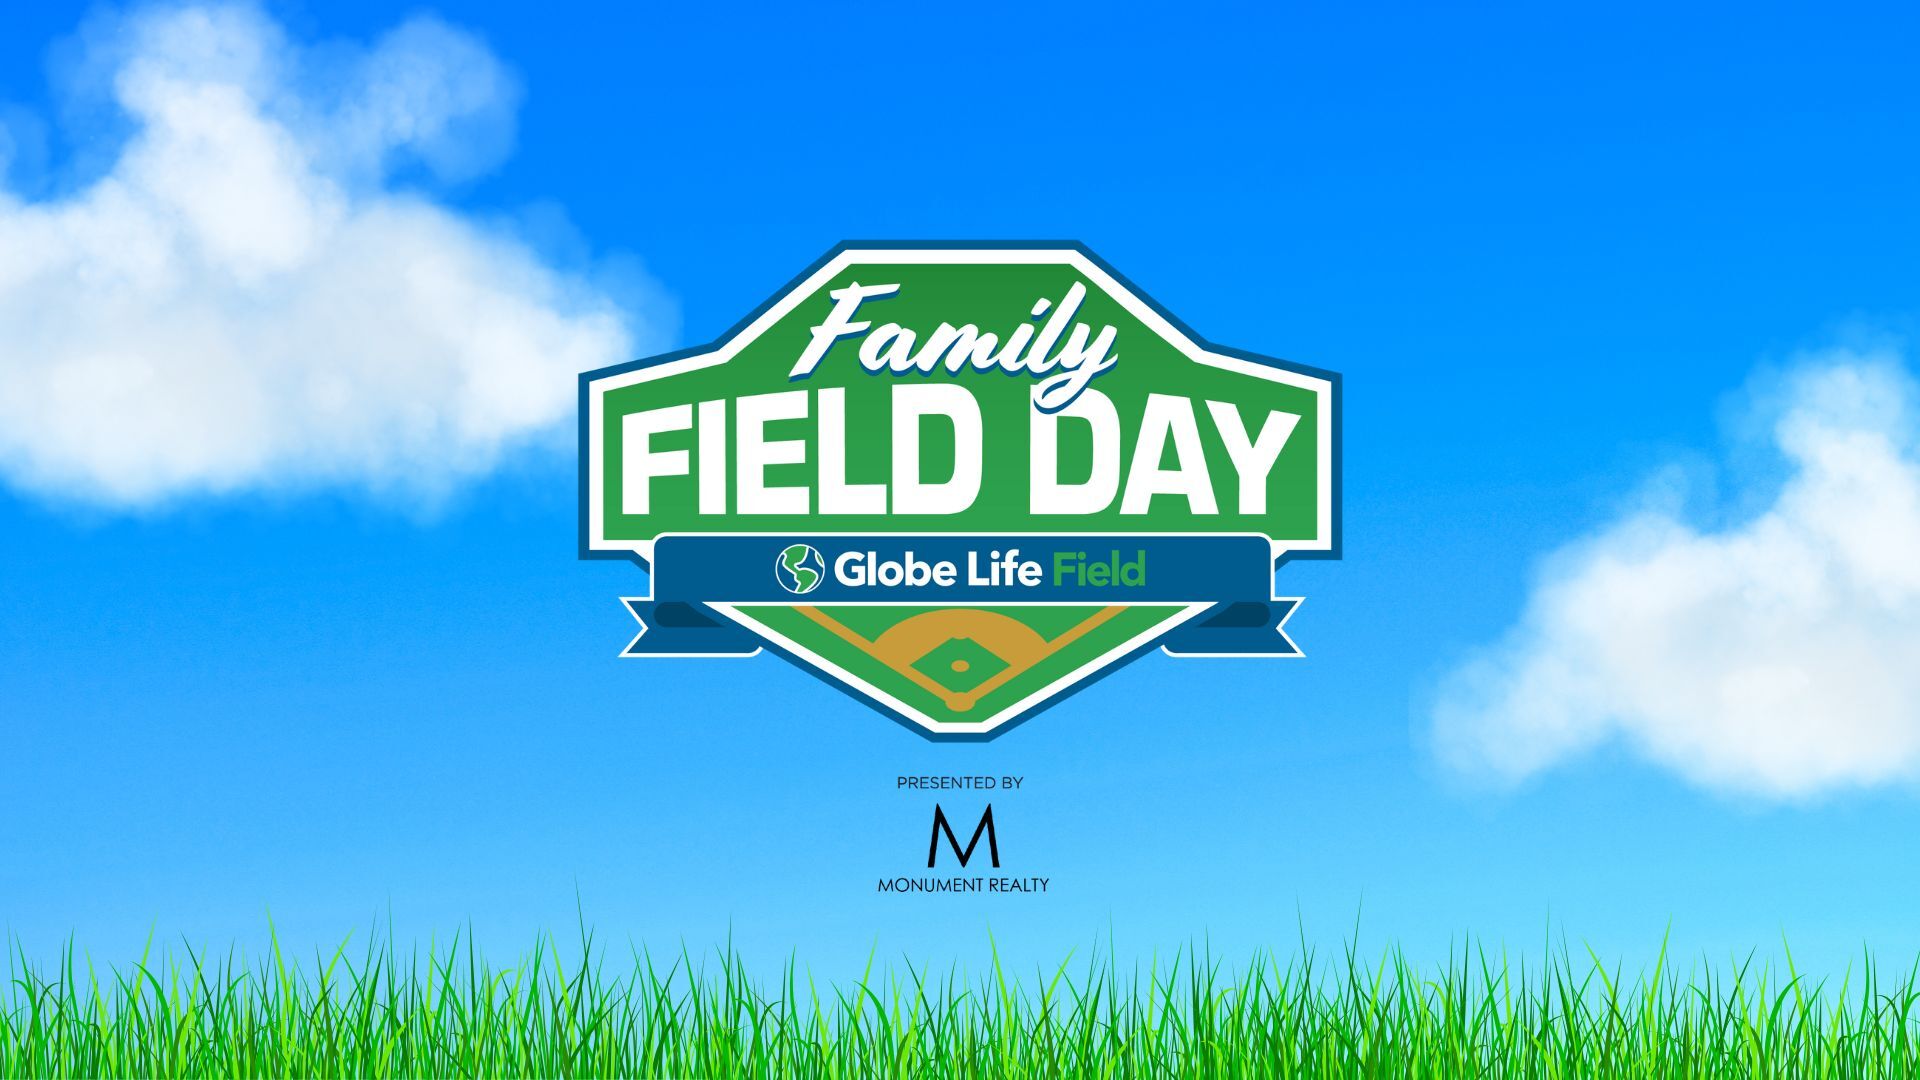 Family Field Day Presented By Monument Realty